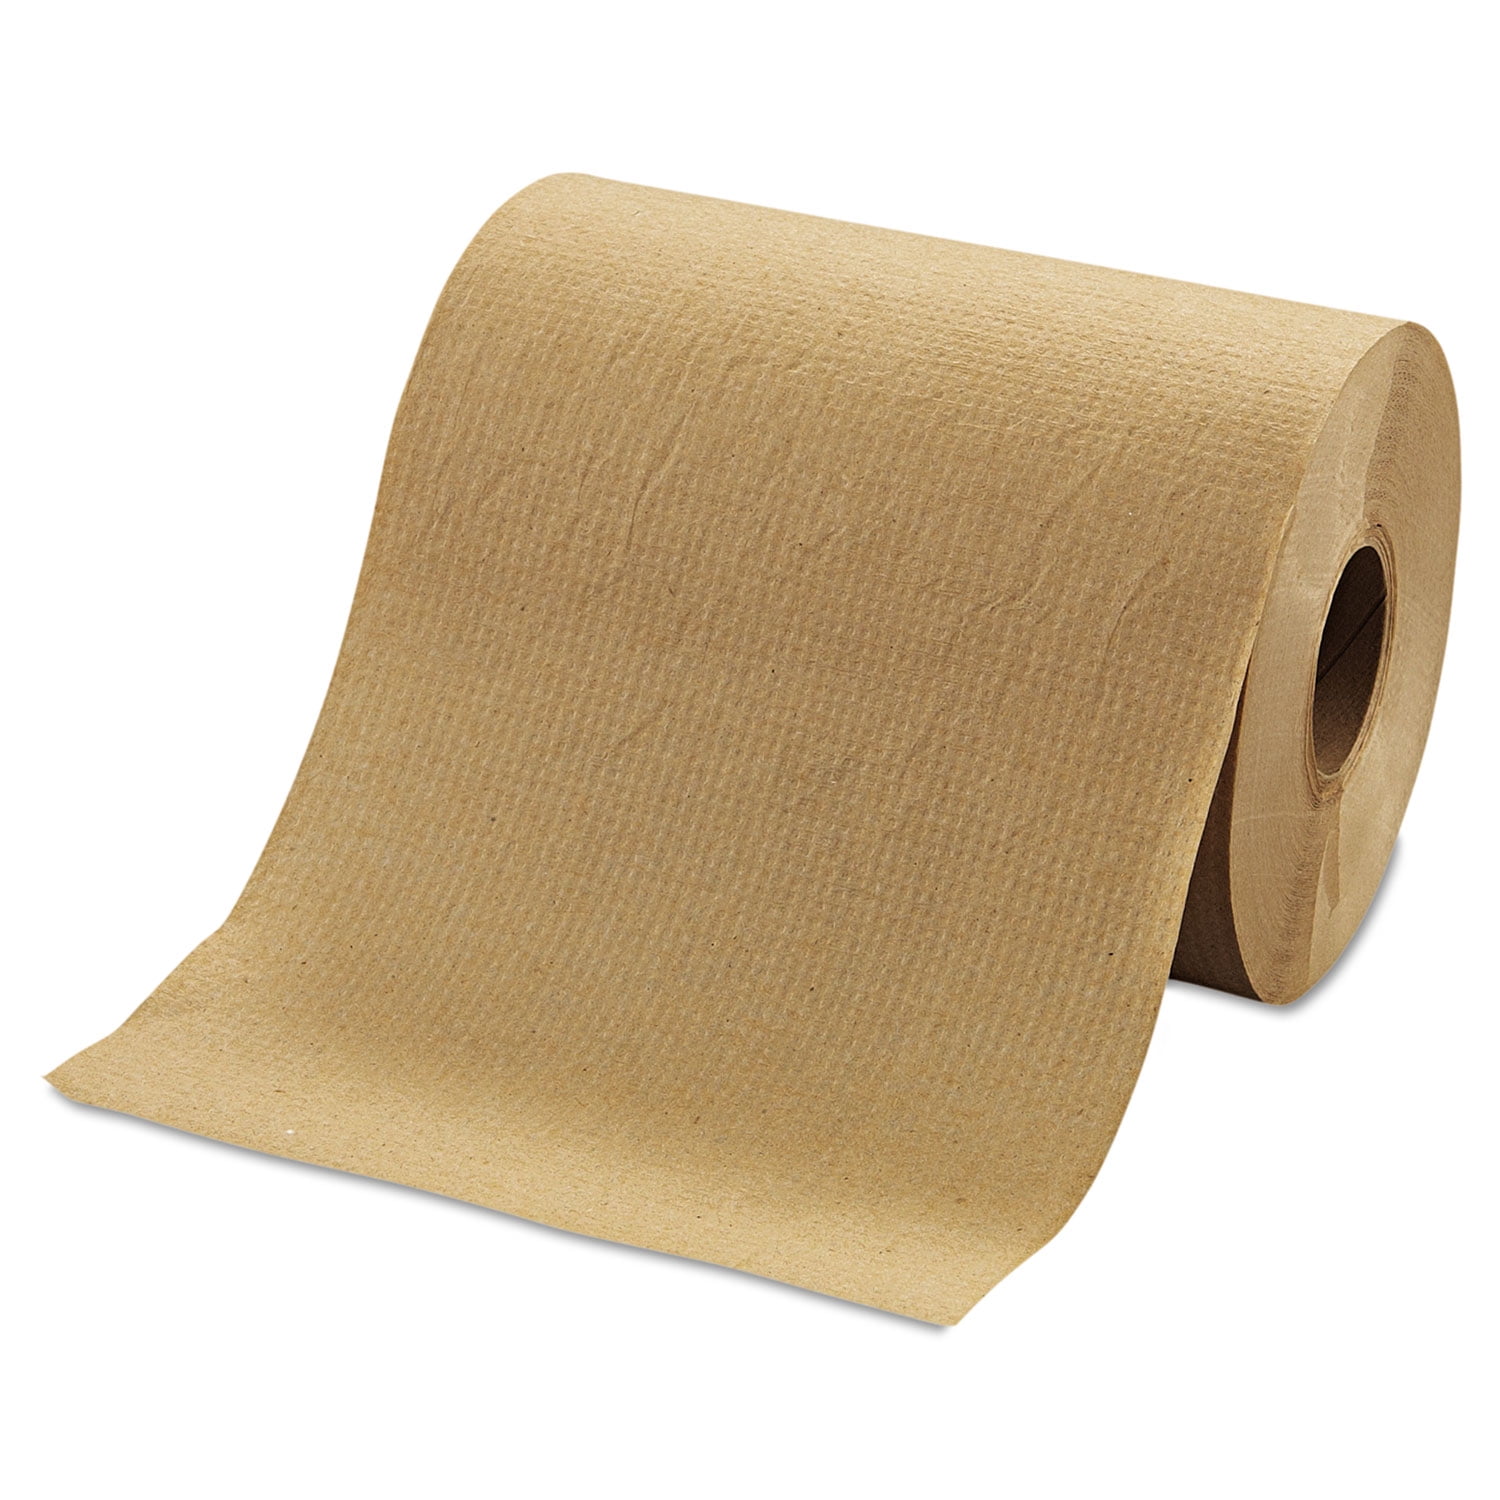 Morcon 8 in. x 350 ft. Brown Morsoft Universal Roll Paper Towels (12  Rolls/Carton) MORR12350 - The Home Depot